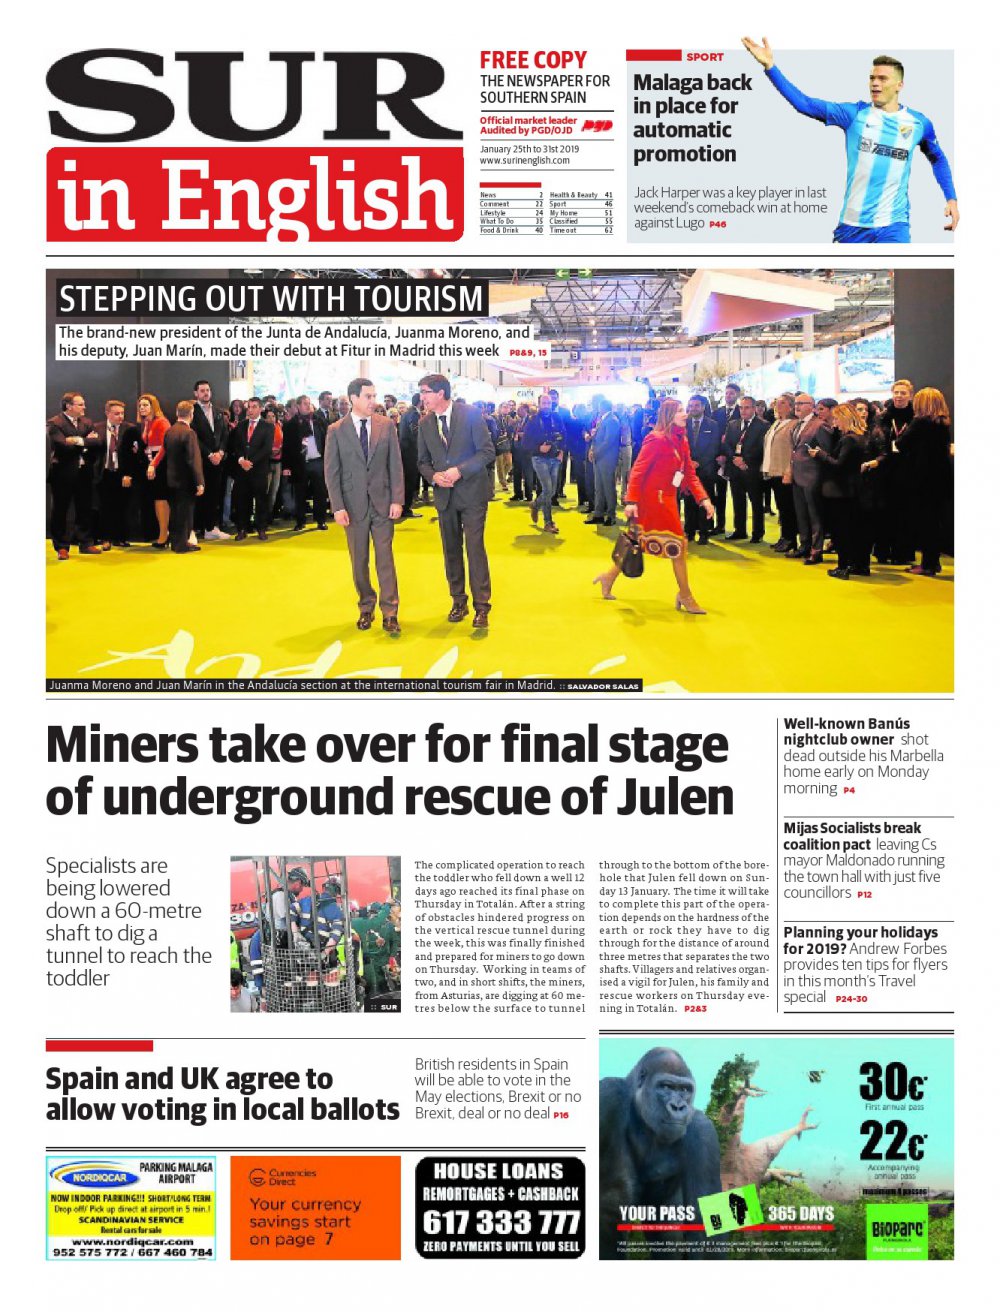 Print Edition SUR in English | January | 2019